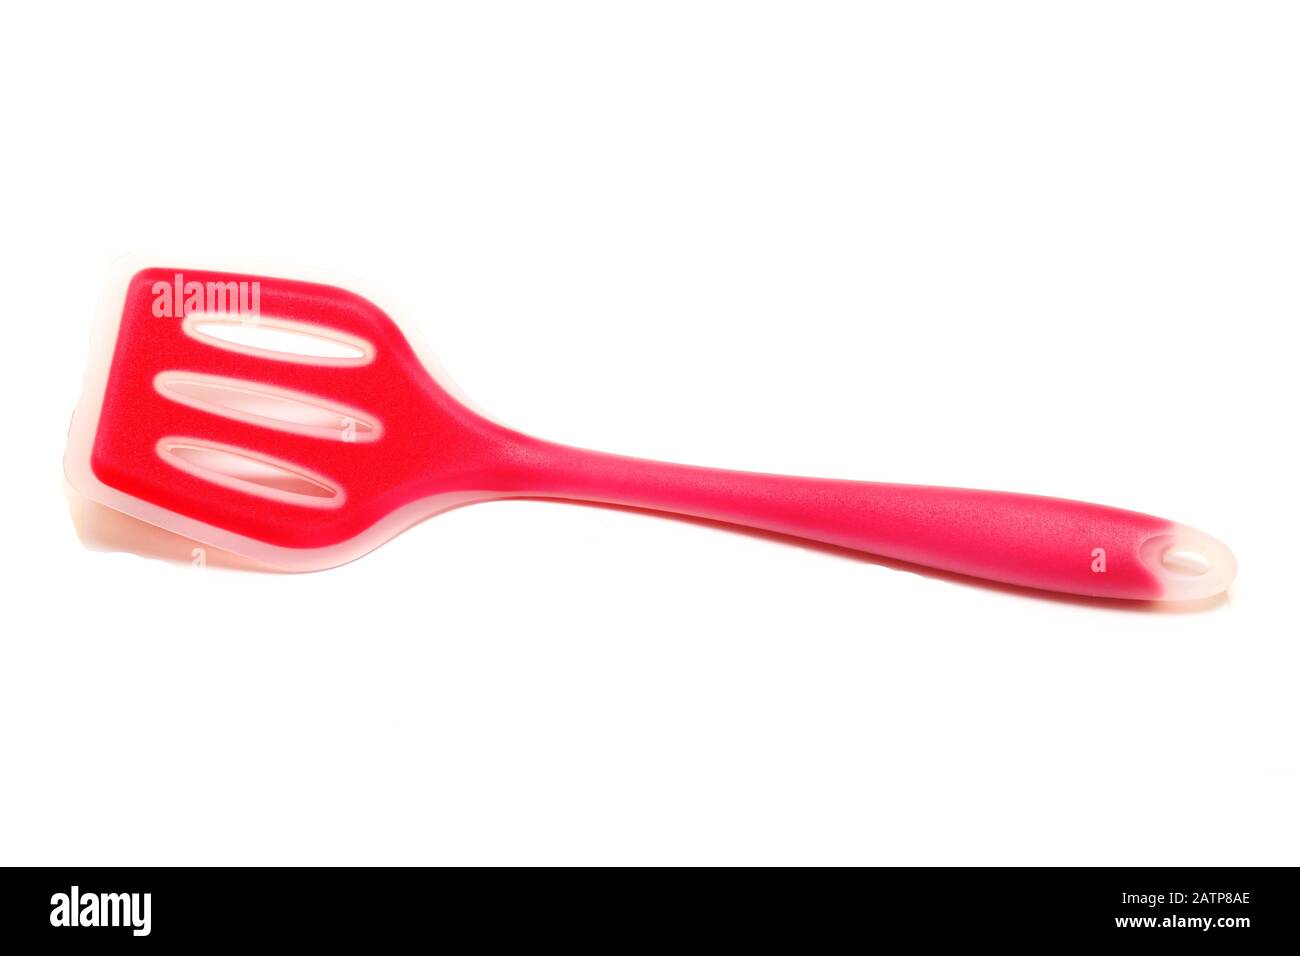 https://c8.alamy.com/comp/2ATP8AE/red-silicone-cooking-spatula-for-cooking-isolated-2ATP8AE.jpg